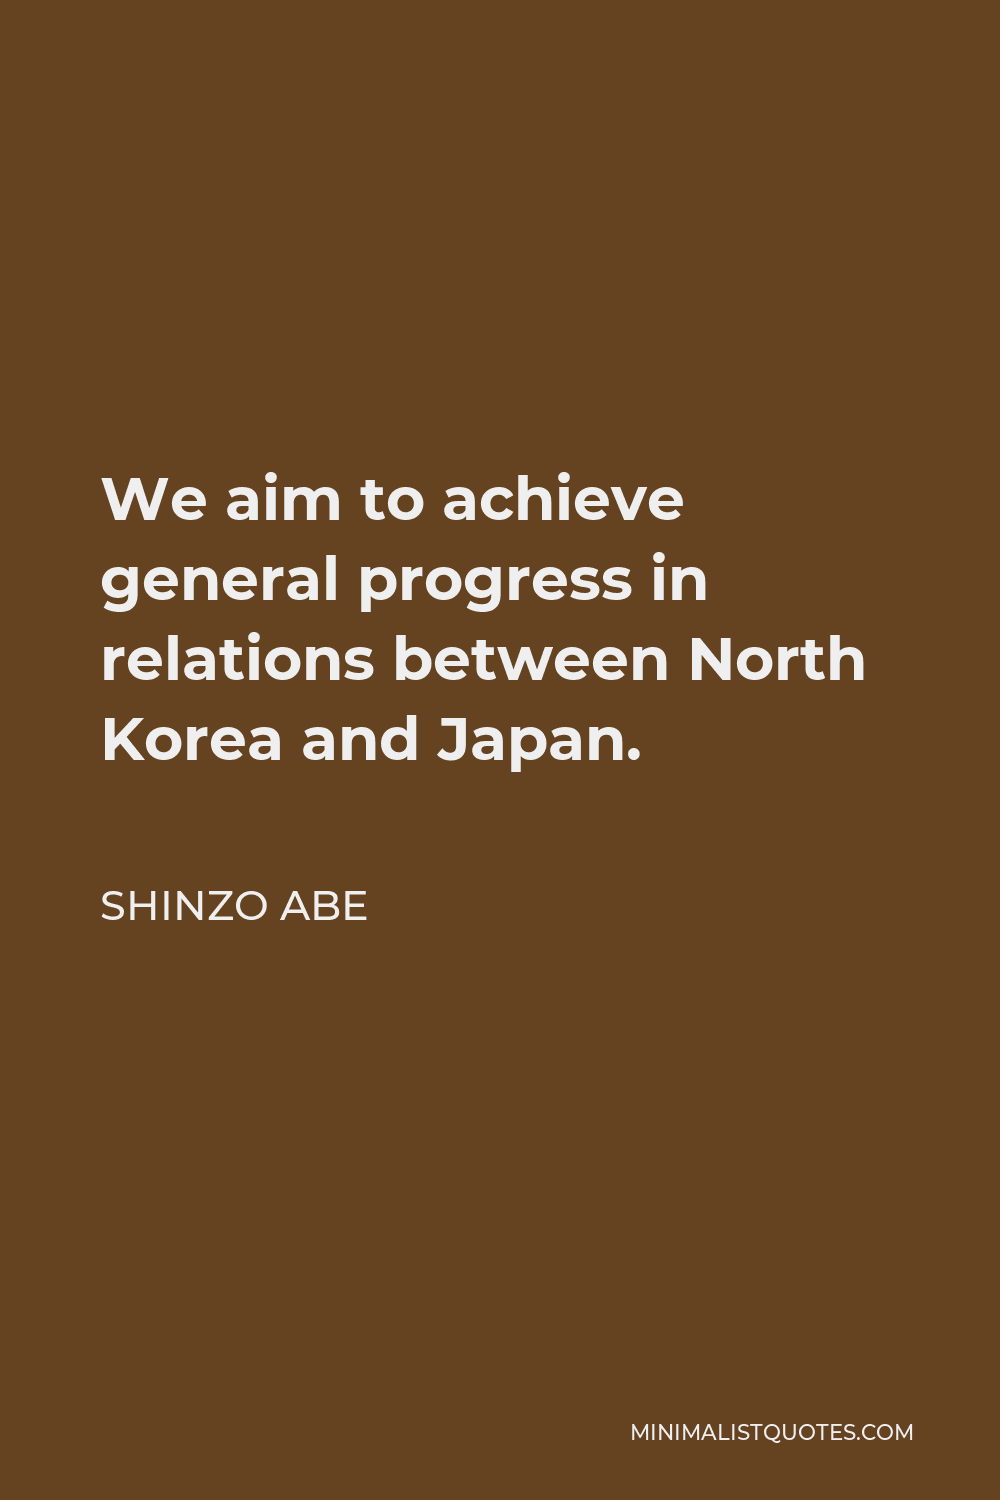 Shinzo Abe Quote - We aim to achieve general progress in relations between North Korea and Japan.